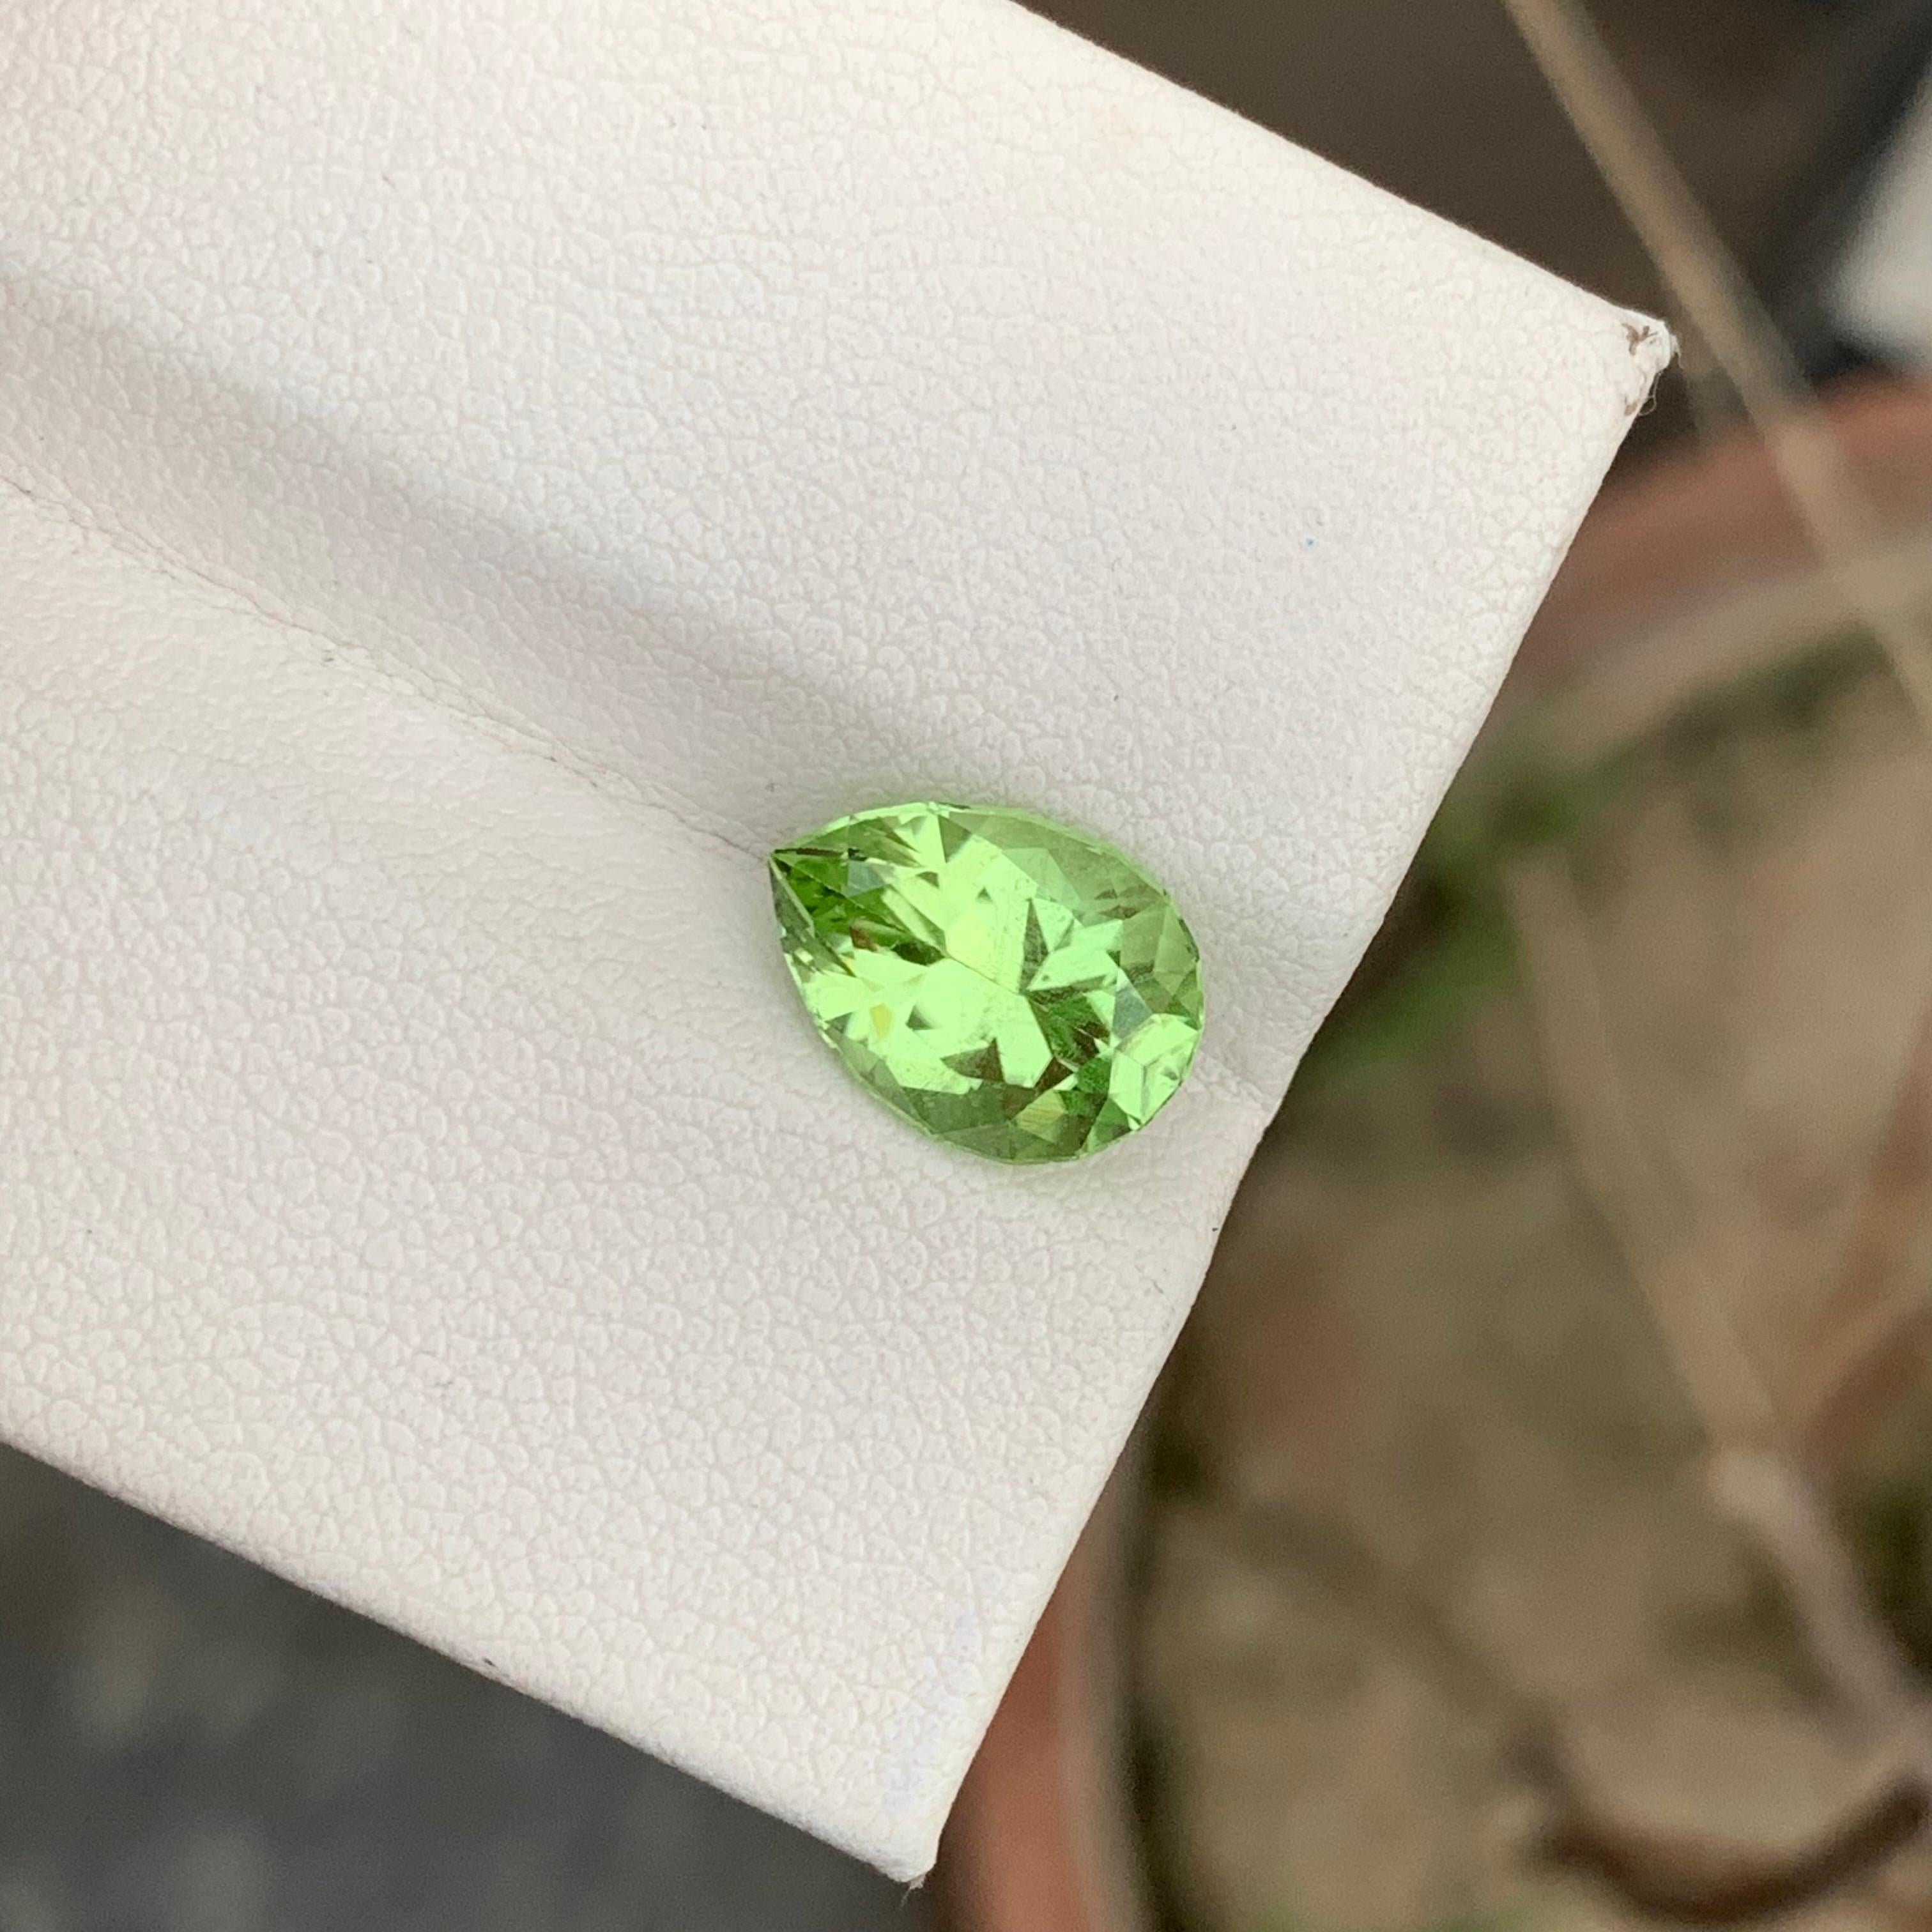 Loose Peridot
Weight: 3.75 Carats 
Dimension: 11.4x8.2x6.5 Mm
Origin: Pakistan 
Shape: Pear 
Treatment: Non
Color: Green 
Certificate: On Demand 
Peridot, a vivid green gemstone, is a captivating member of the olivine mineral family. Known for its